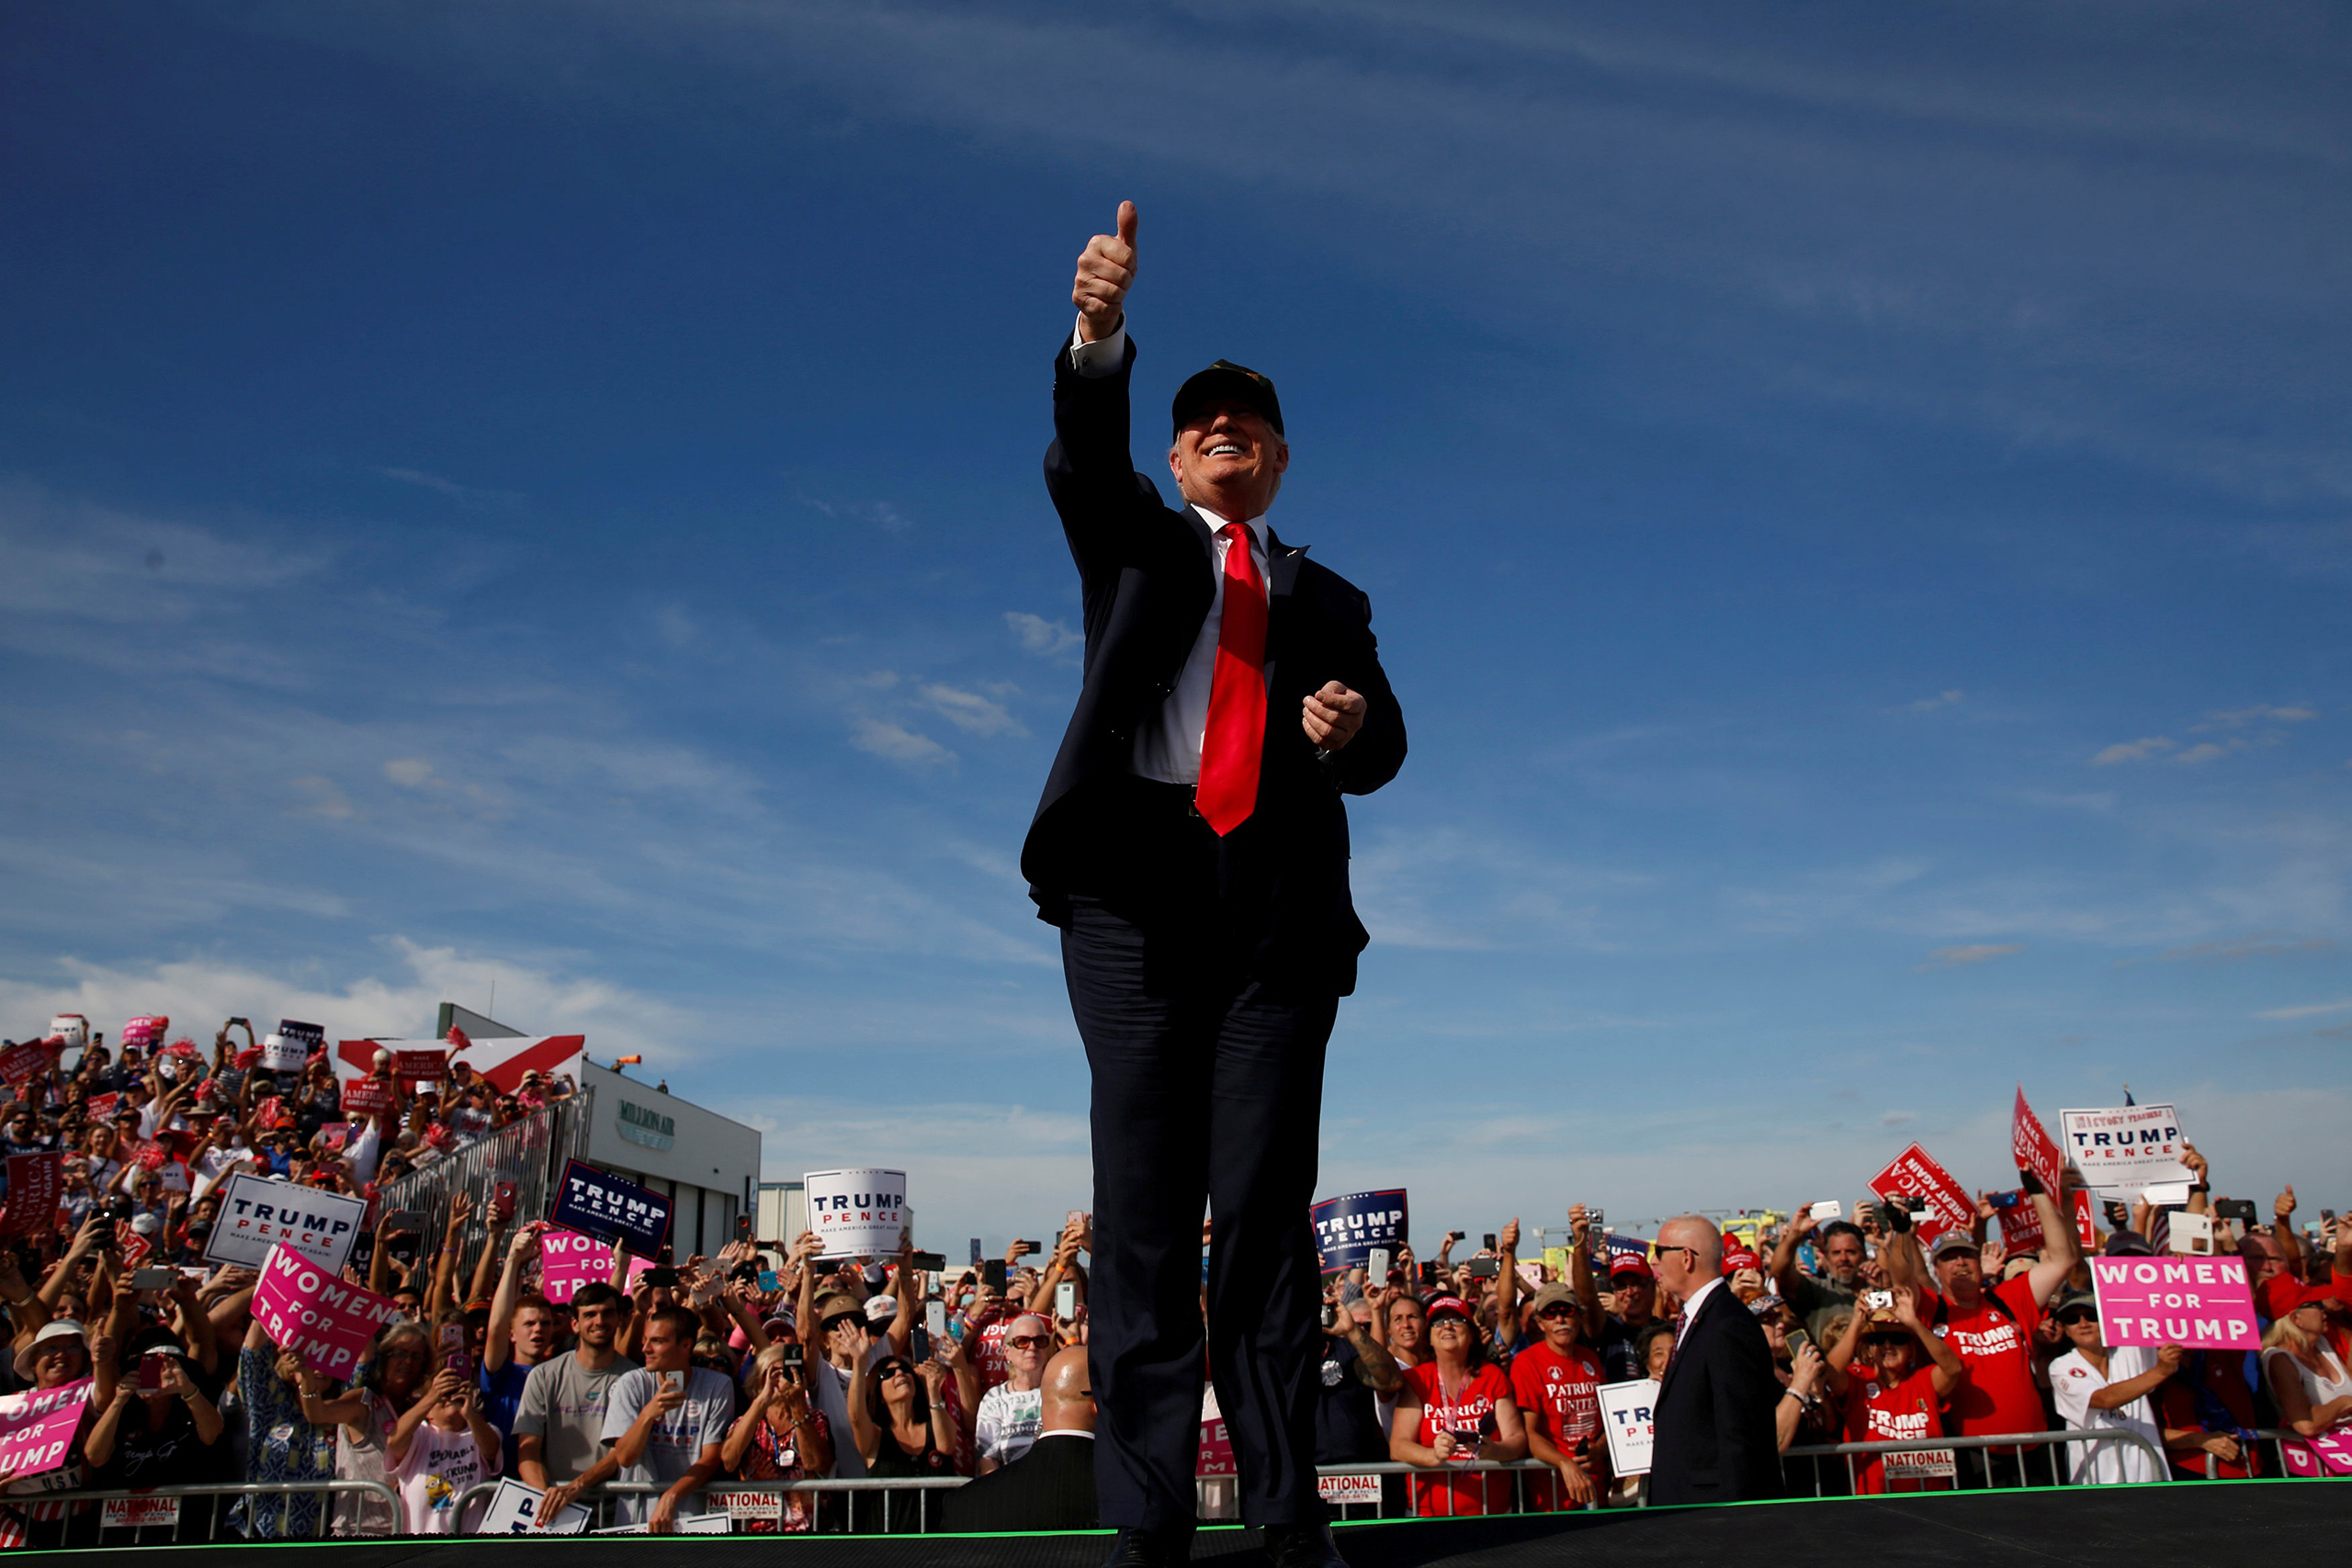 Donald Trump’s final rallies drew massive crowds, which his campaign relied on to gauge voter enthusiasm (Jonathan Ernst—REUTERS)